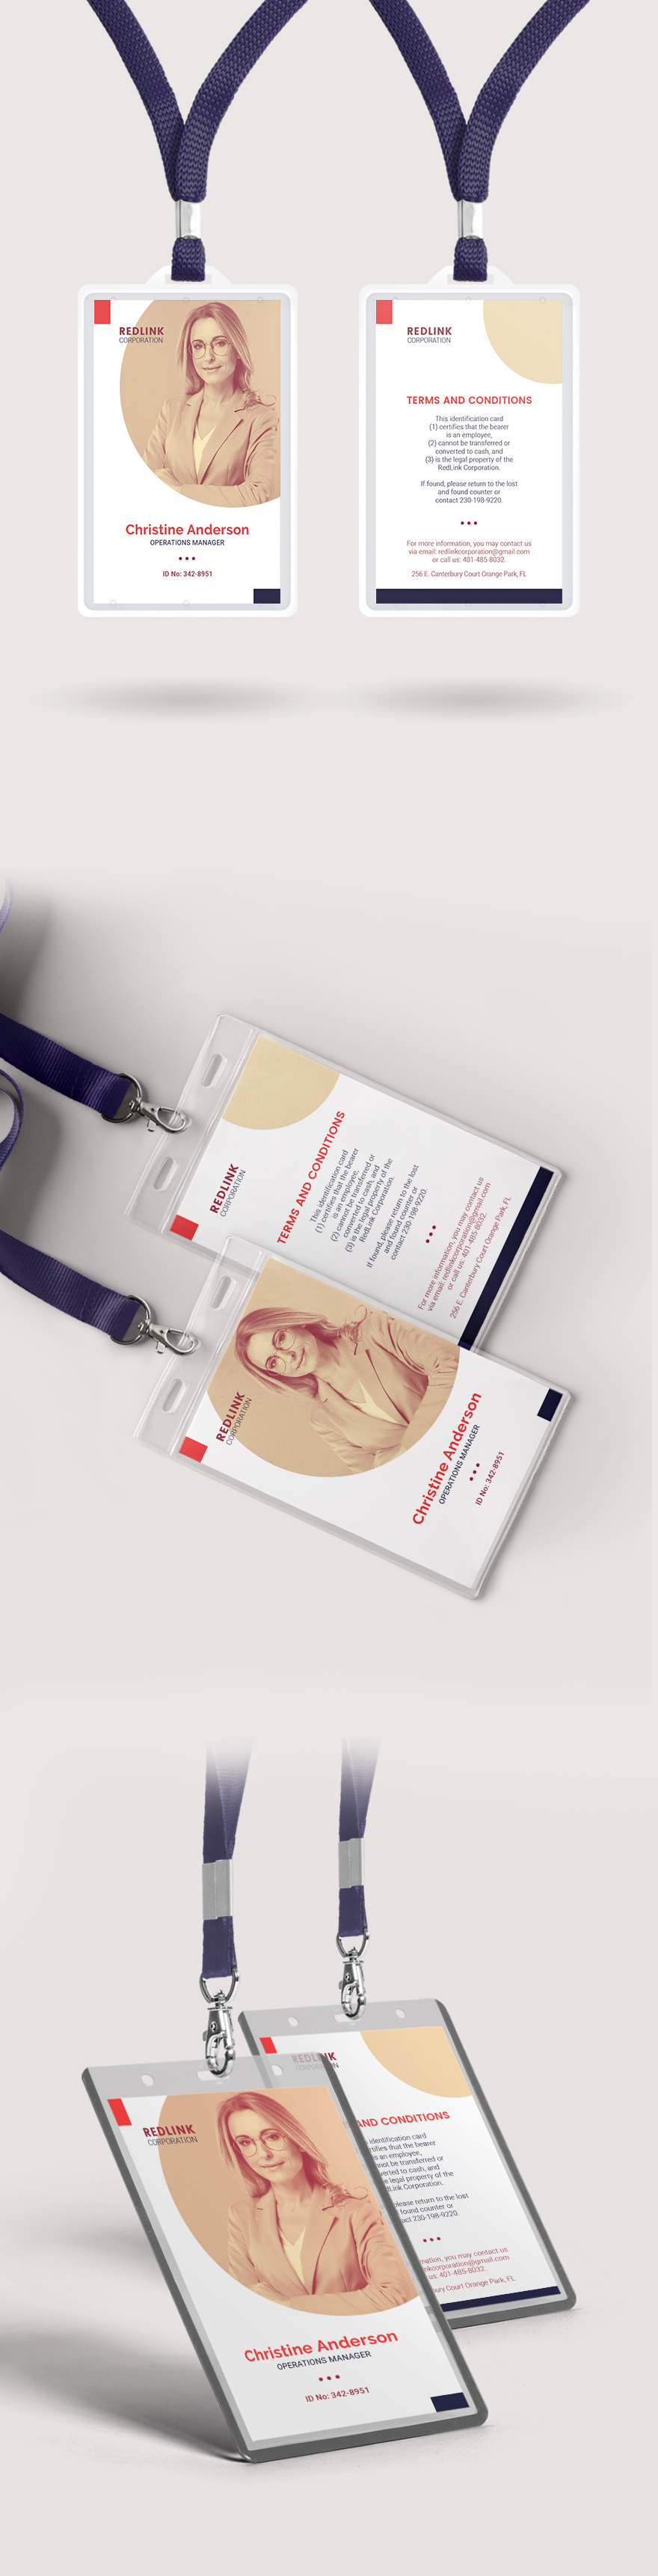 download-template-id-card-psd-free-resume-gallery